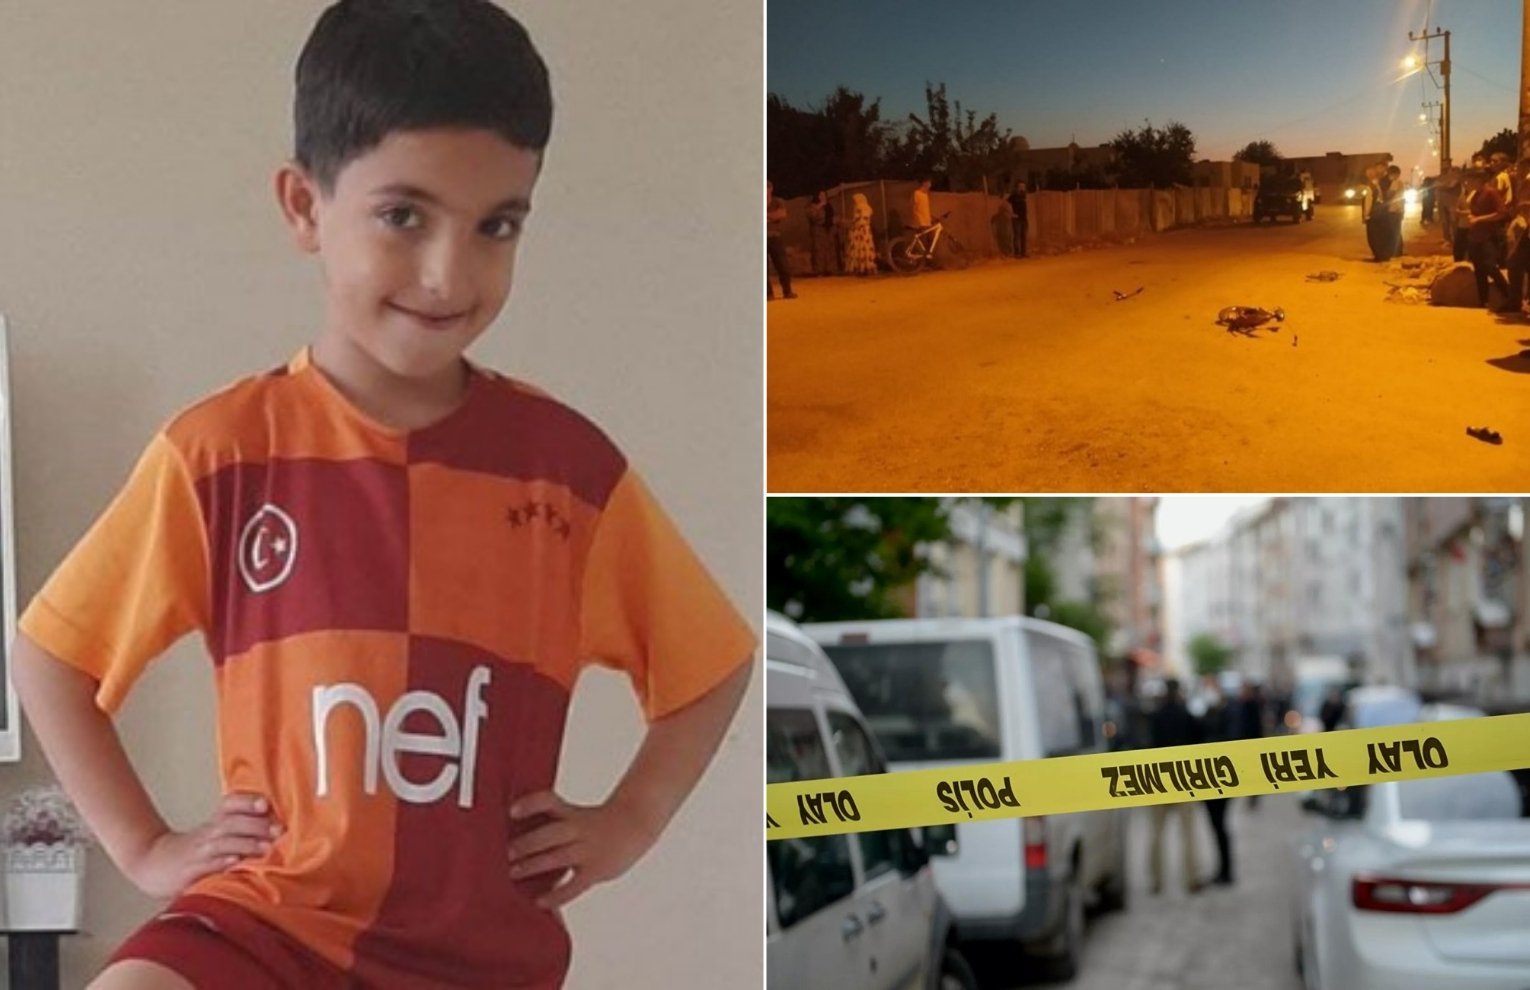 Mihraç’s father: He wanted it so much, we had just bought him a bike